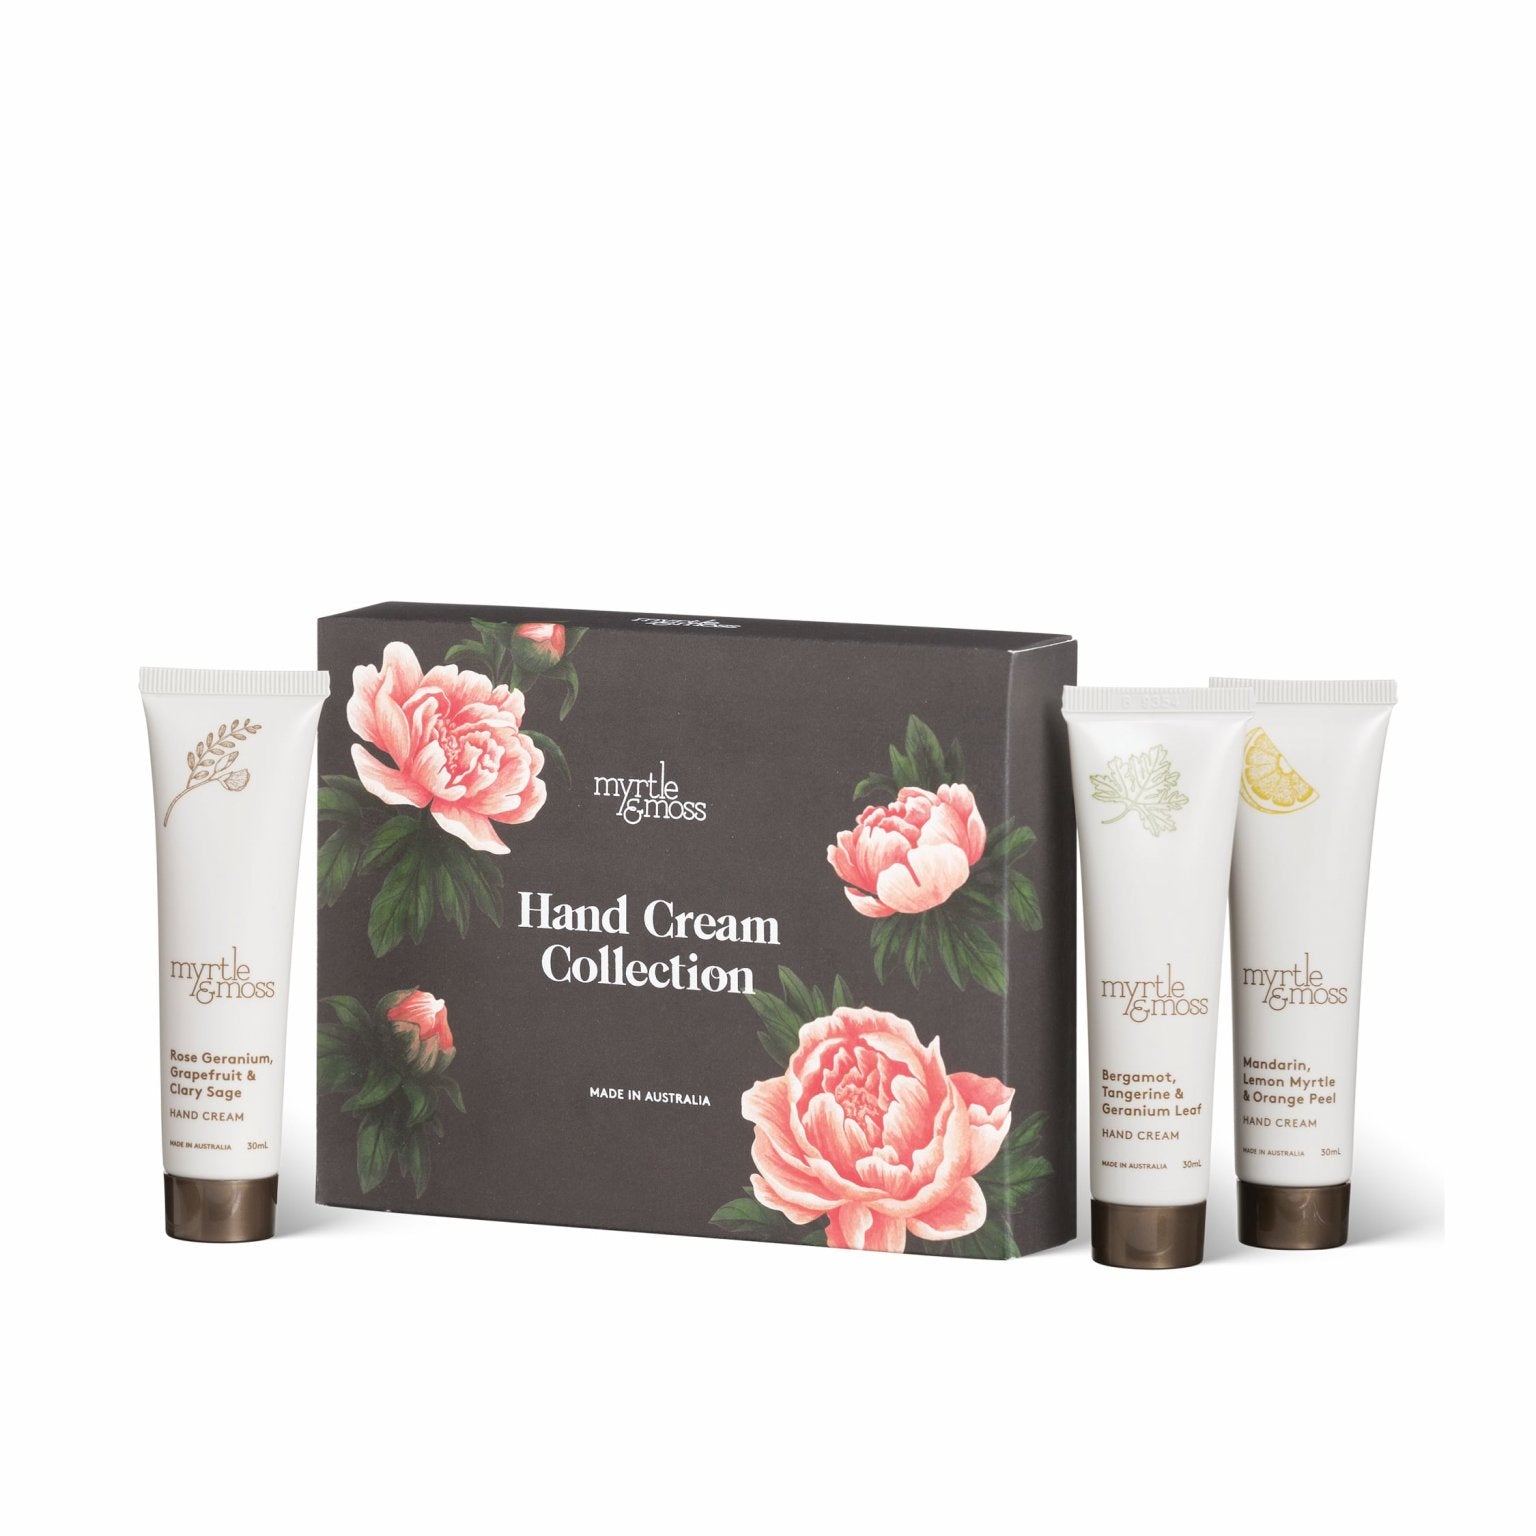 Myrtle and Moss Hand Cream Collection